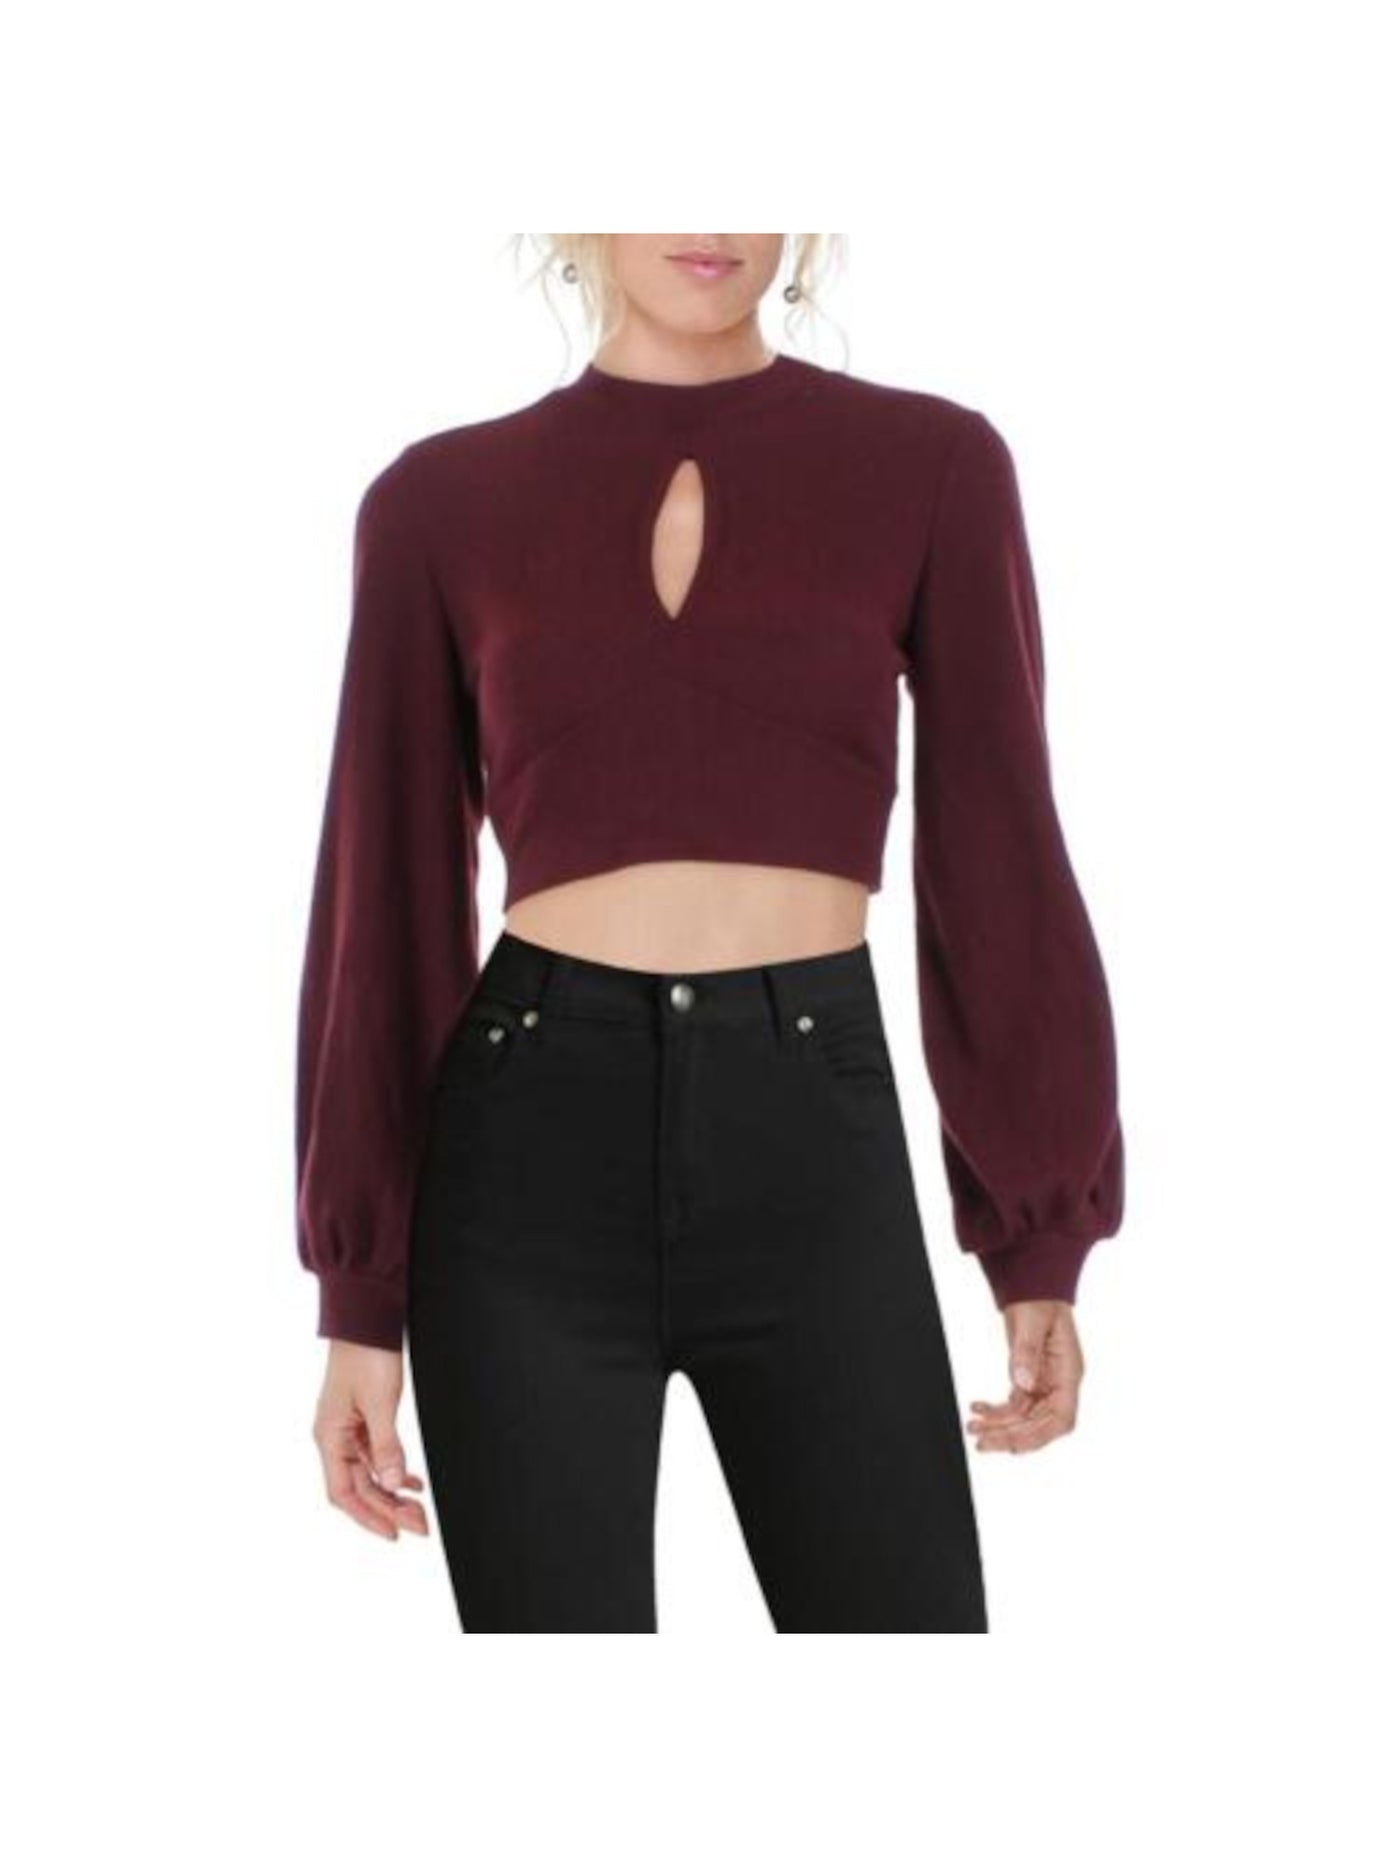 ALMOST FAMOUS Womens Burgundy Ribbed Cut Out Button Top Open Back Tie Hem Balloon Sleeve Mock Neck Crop Top Sweater Juniors XL